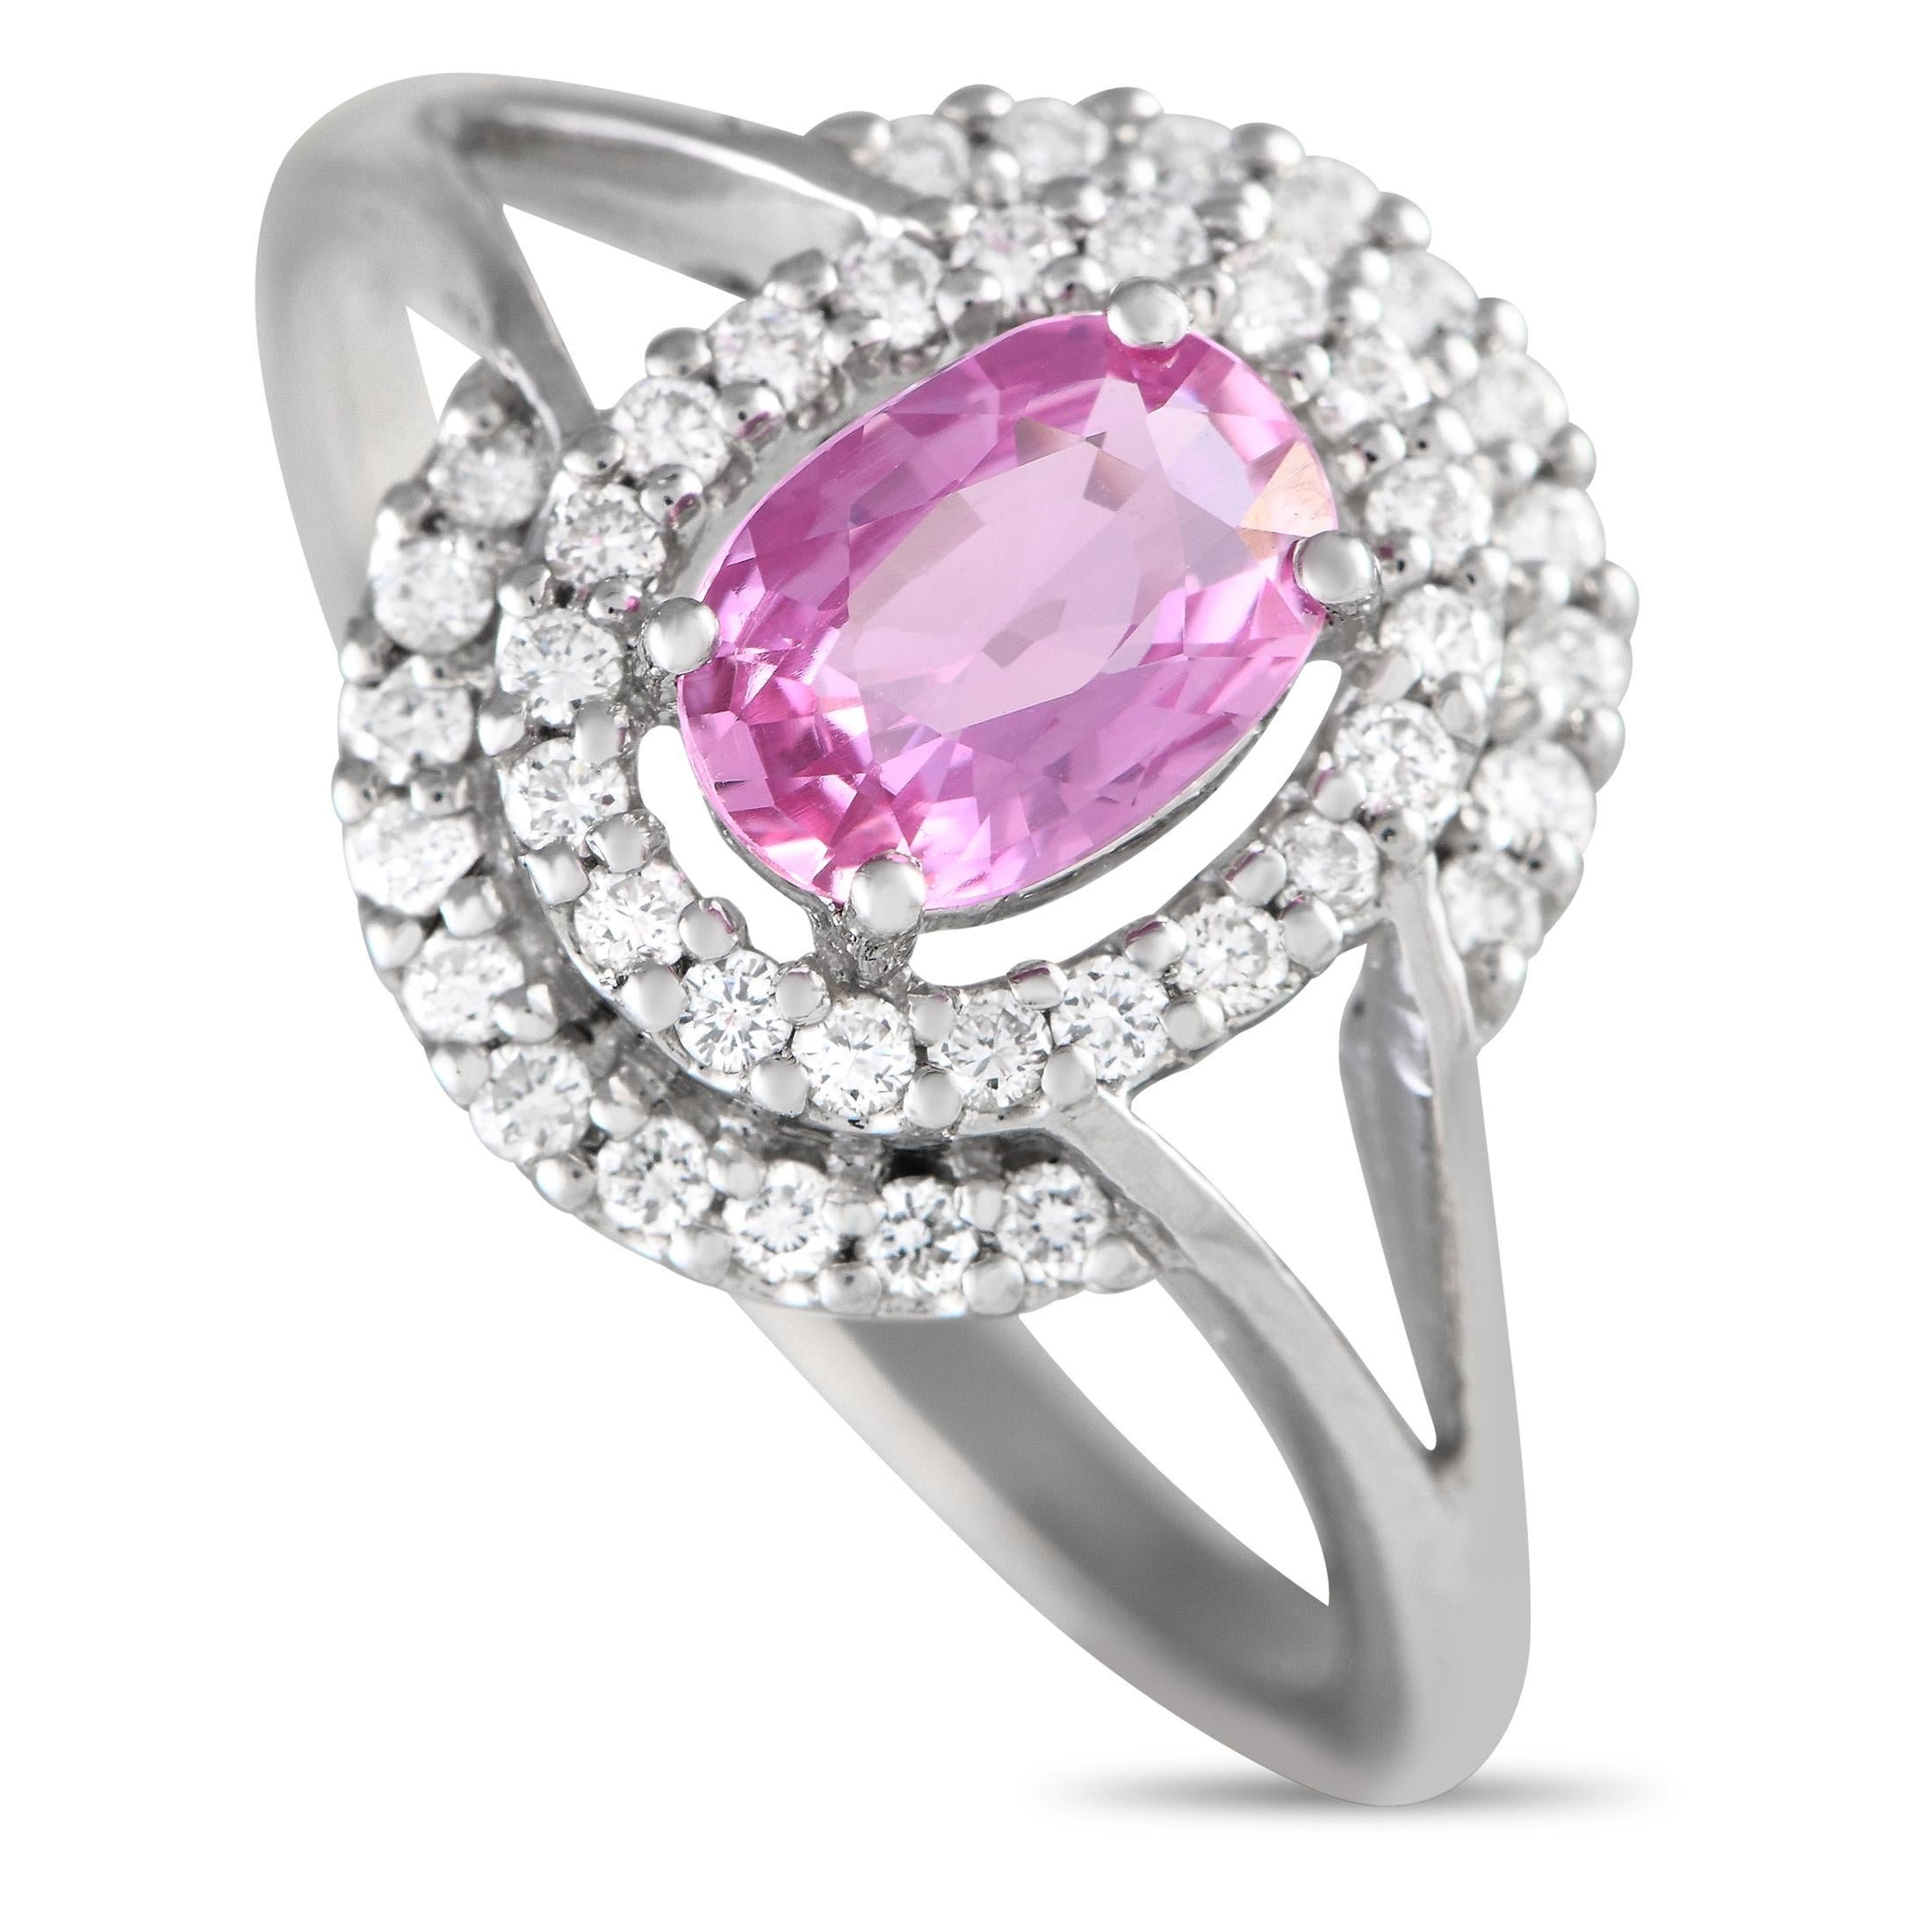 18K White Gold 0.40ct Diamond and Pink Sapphire Ring In Excellent Condition For Sale In Southampton, PA